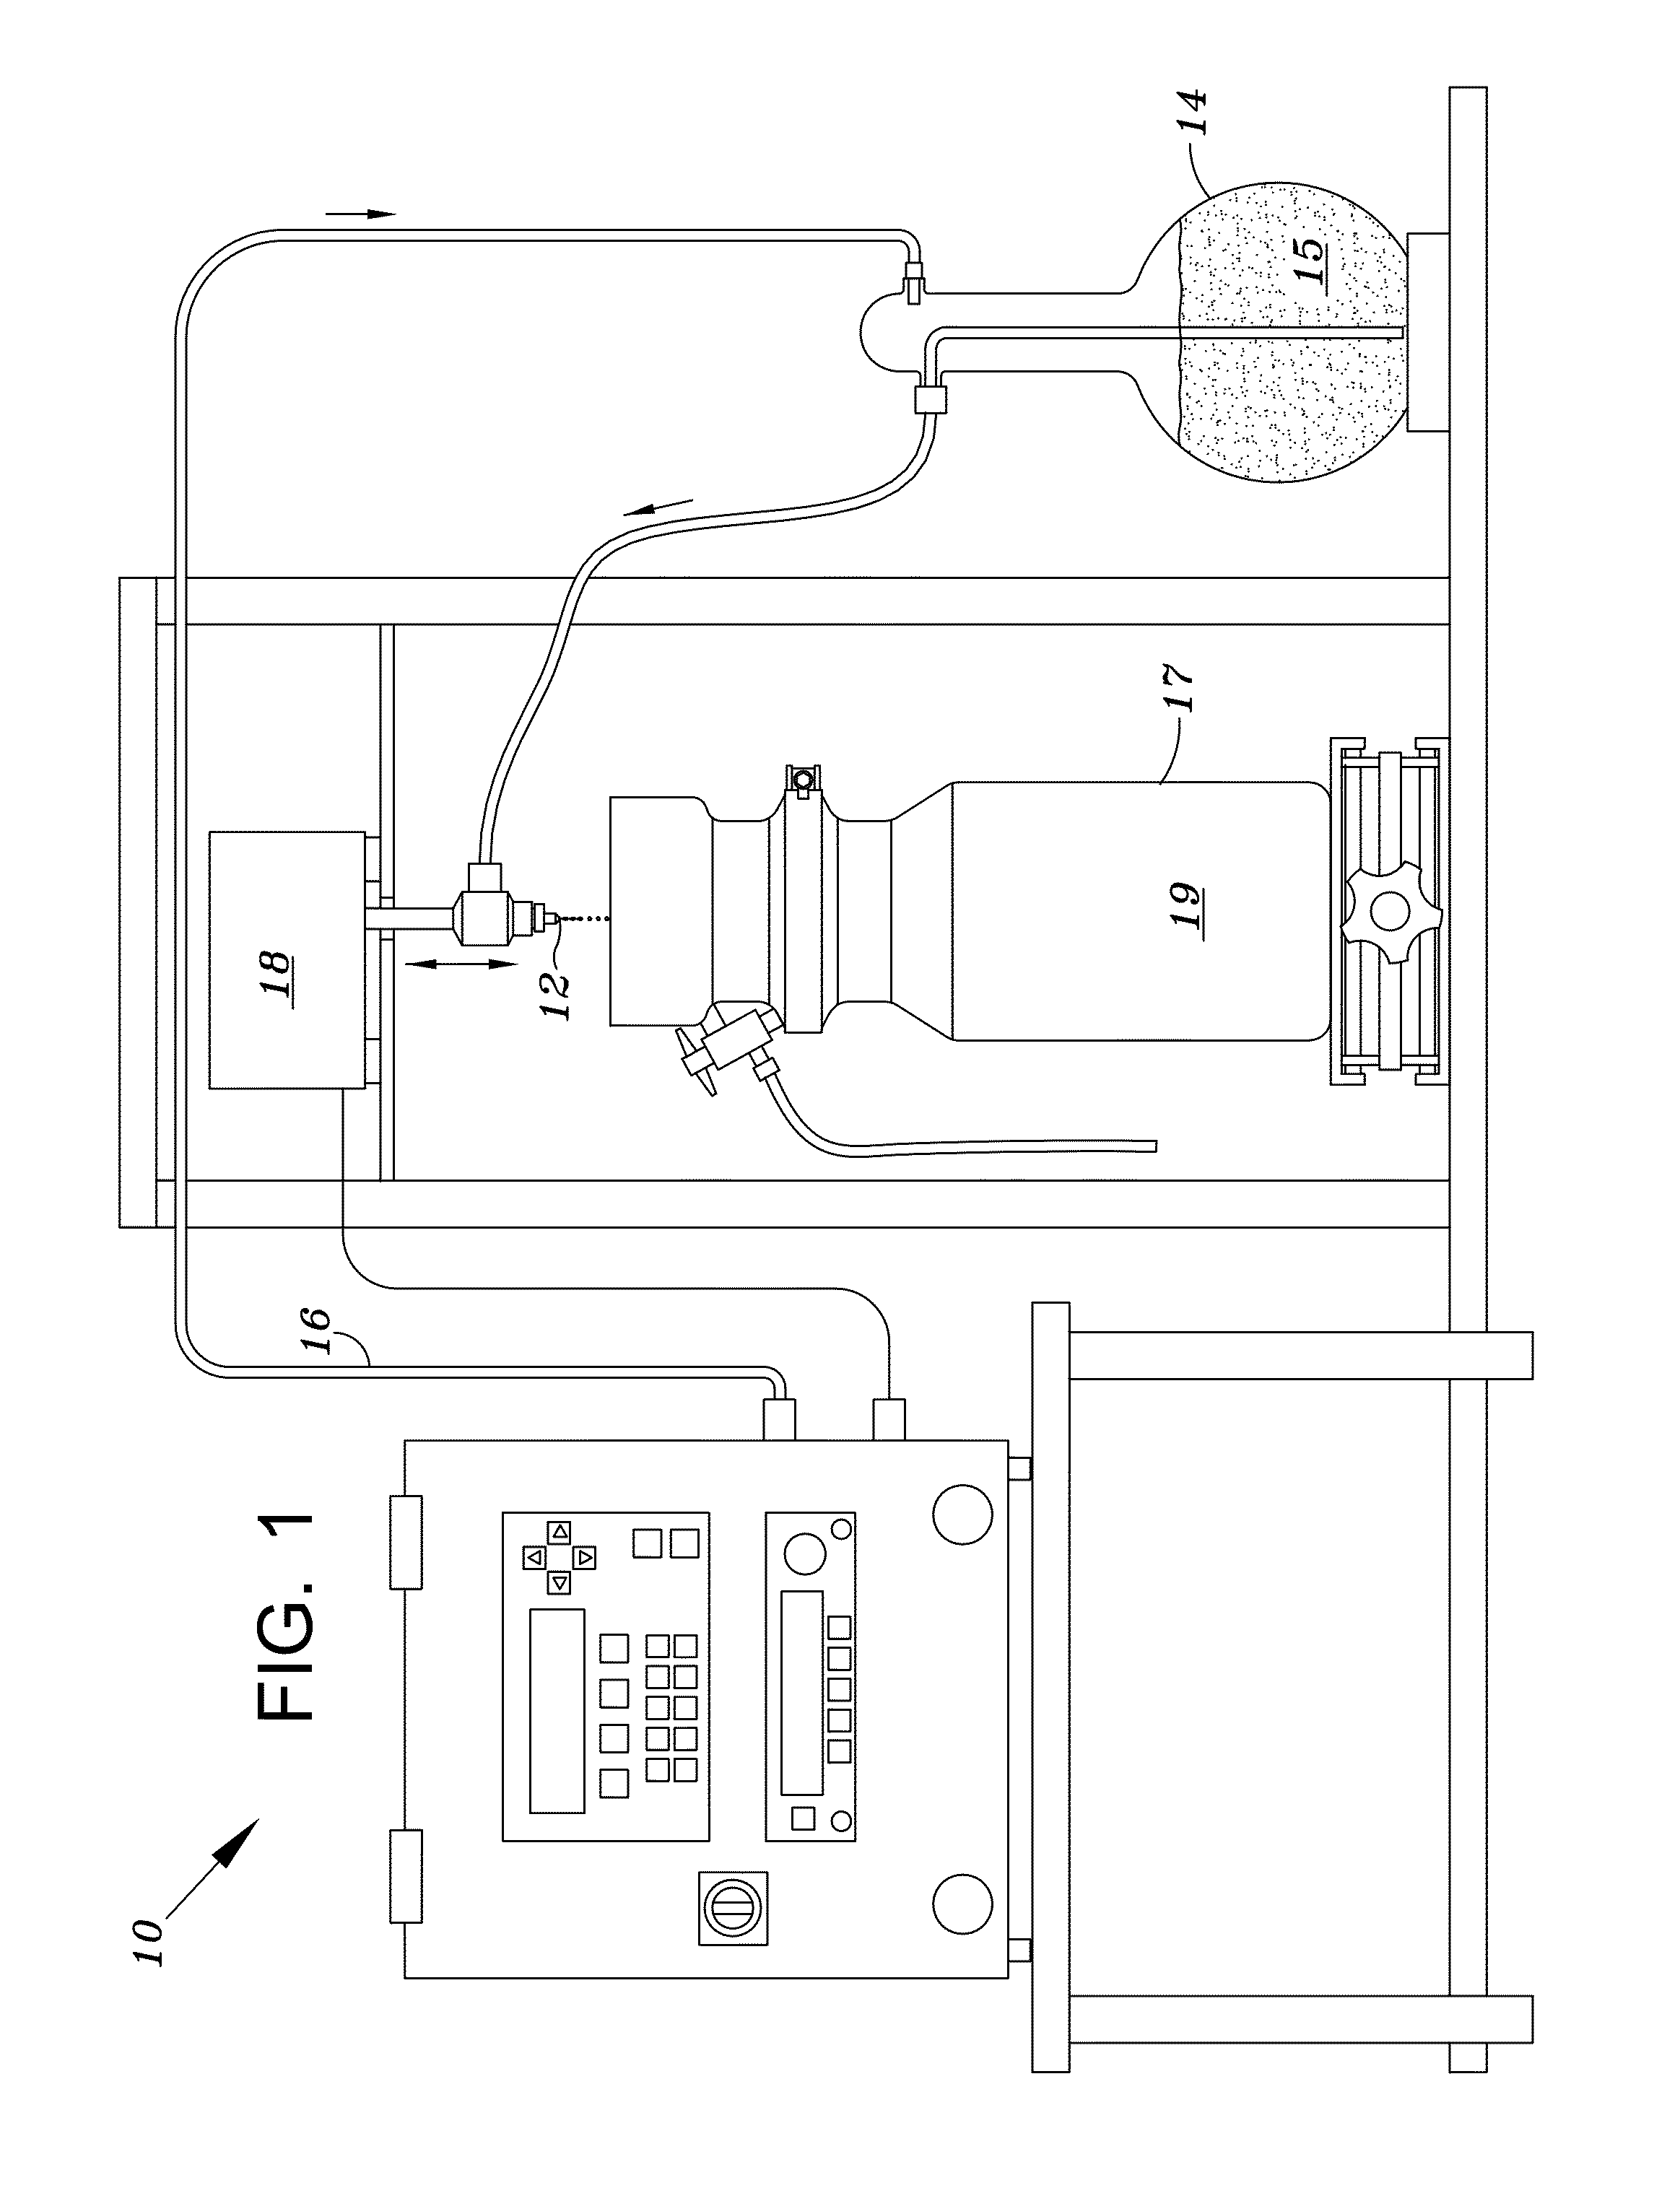 Proppant particles formed from slurry droplets and method of use